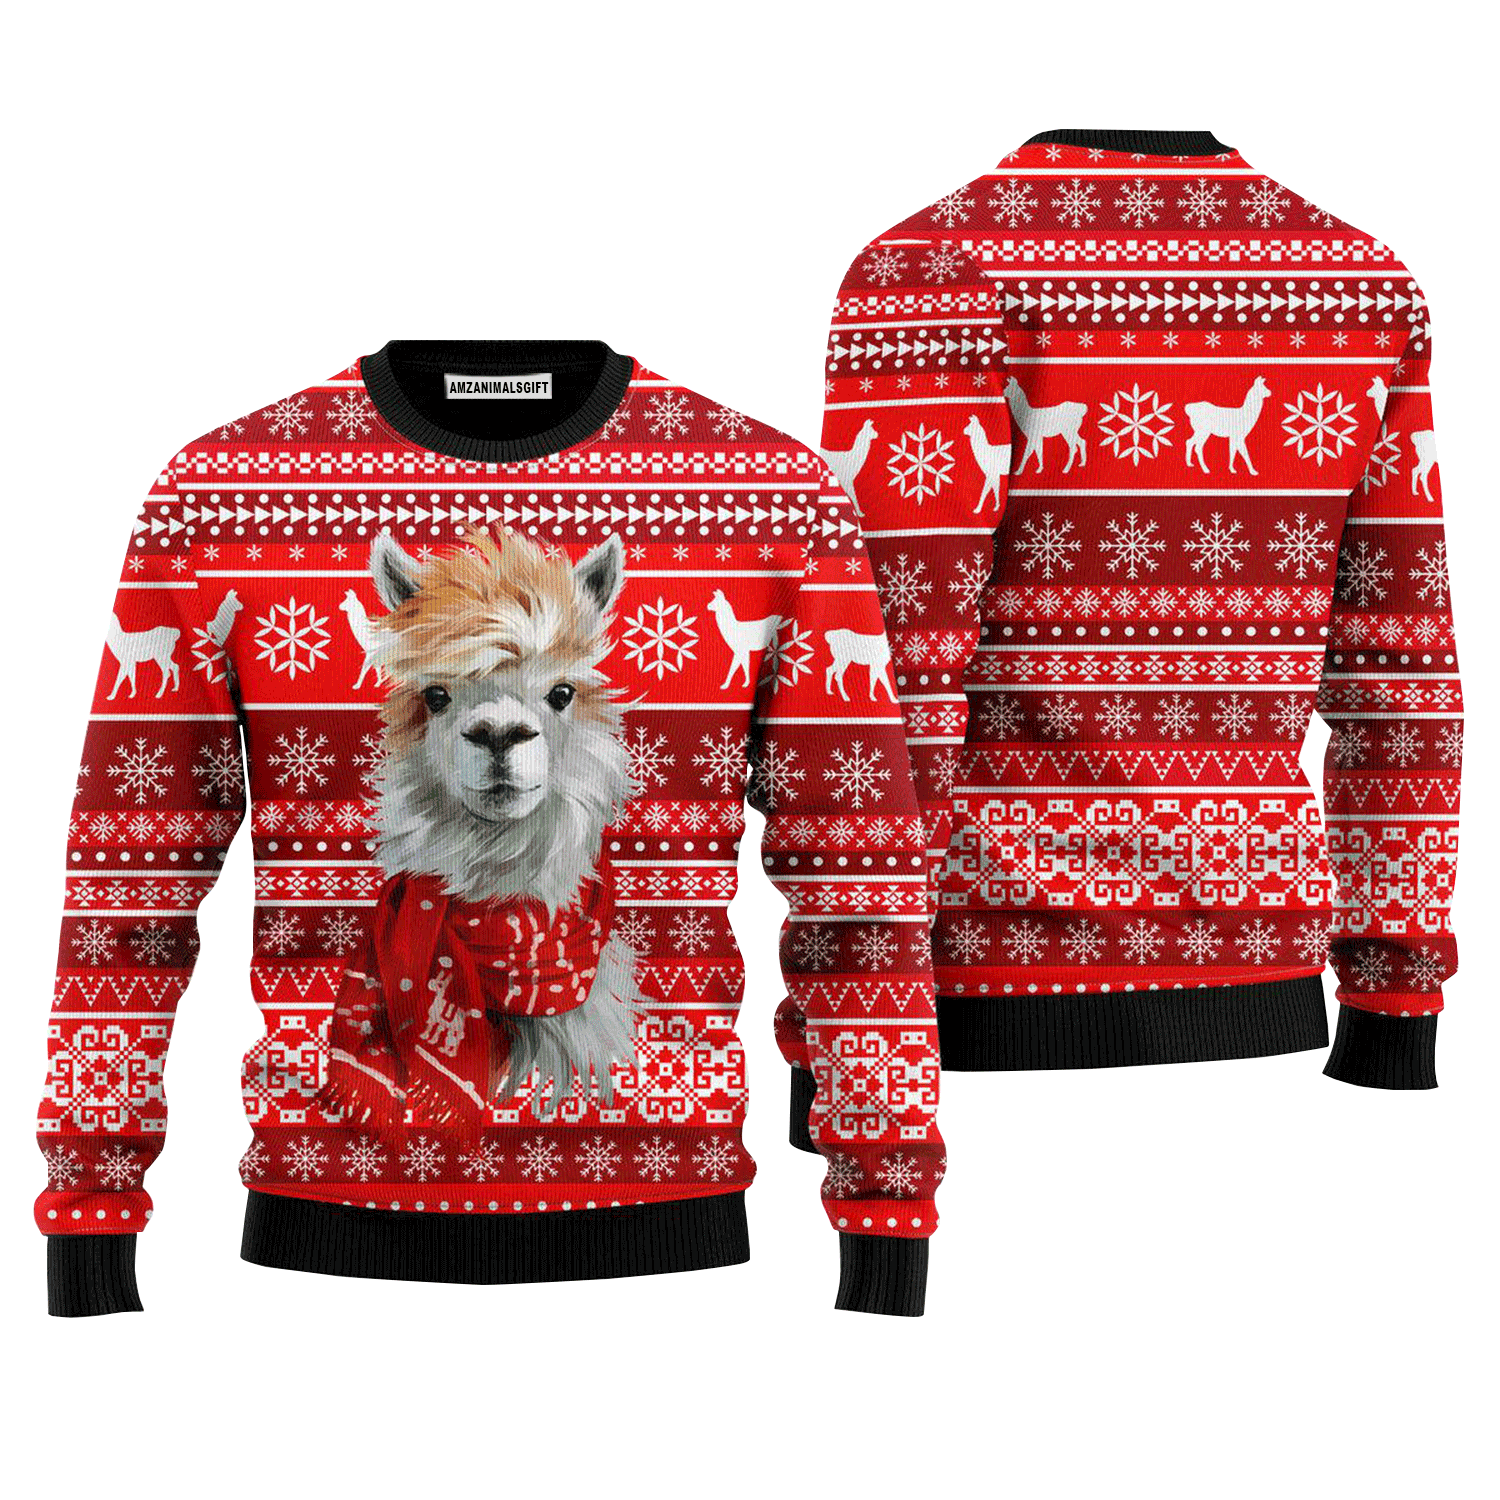 Festive Llama Xmas Sweater, Ugly Sweater For Men & Women, Perfect Outfit For Christmas New Year Autumn Winter